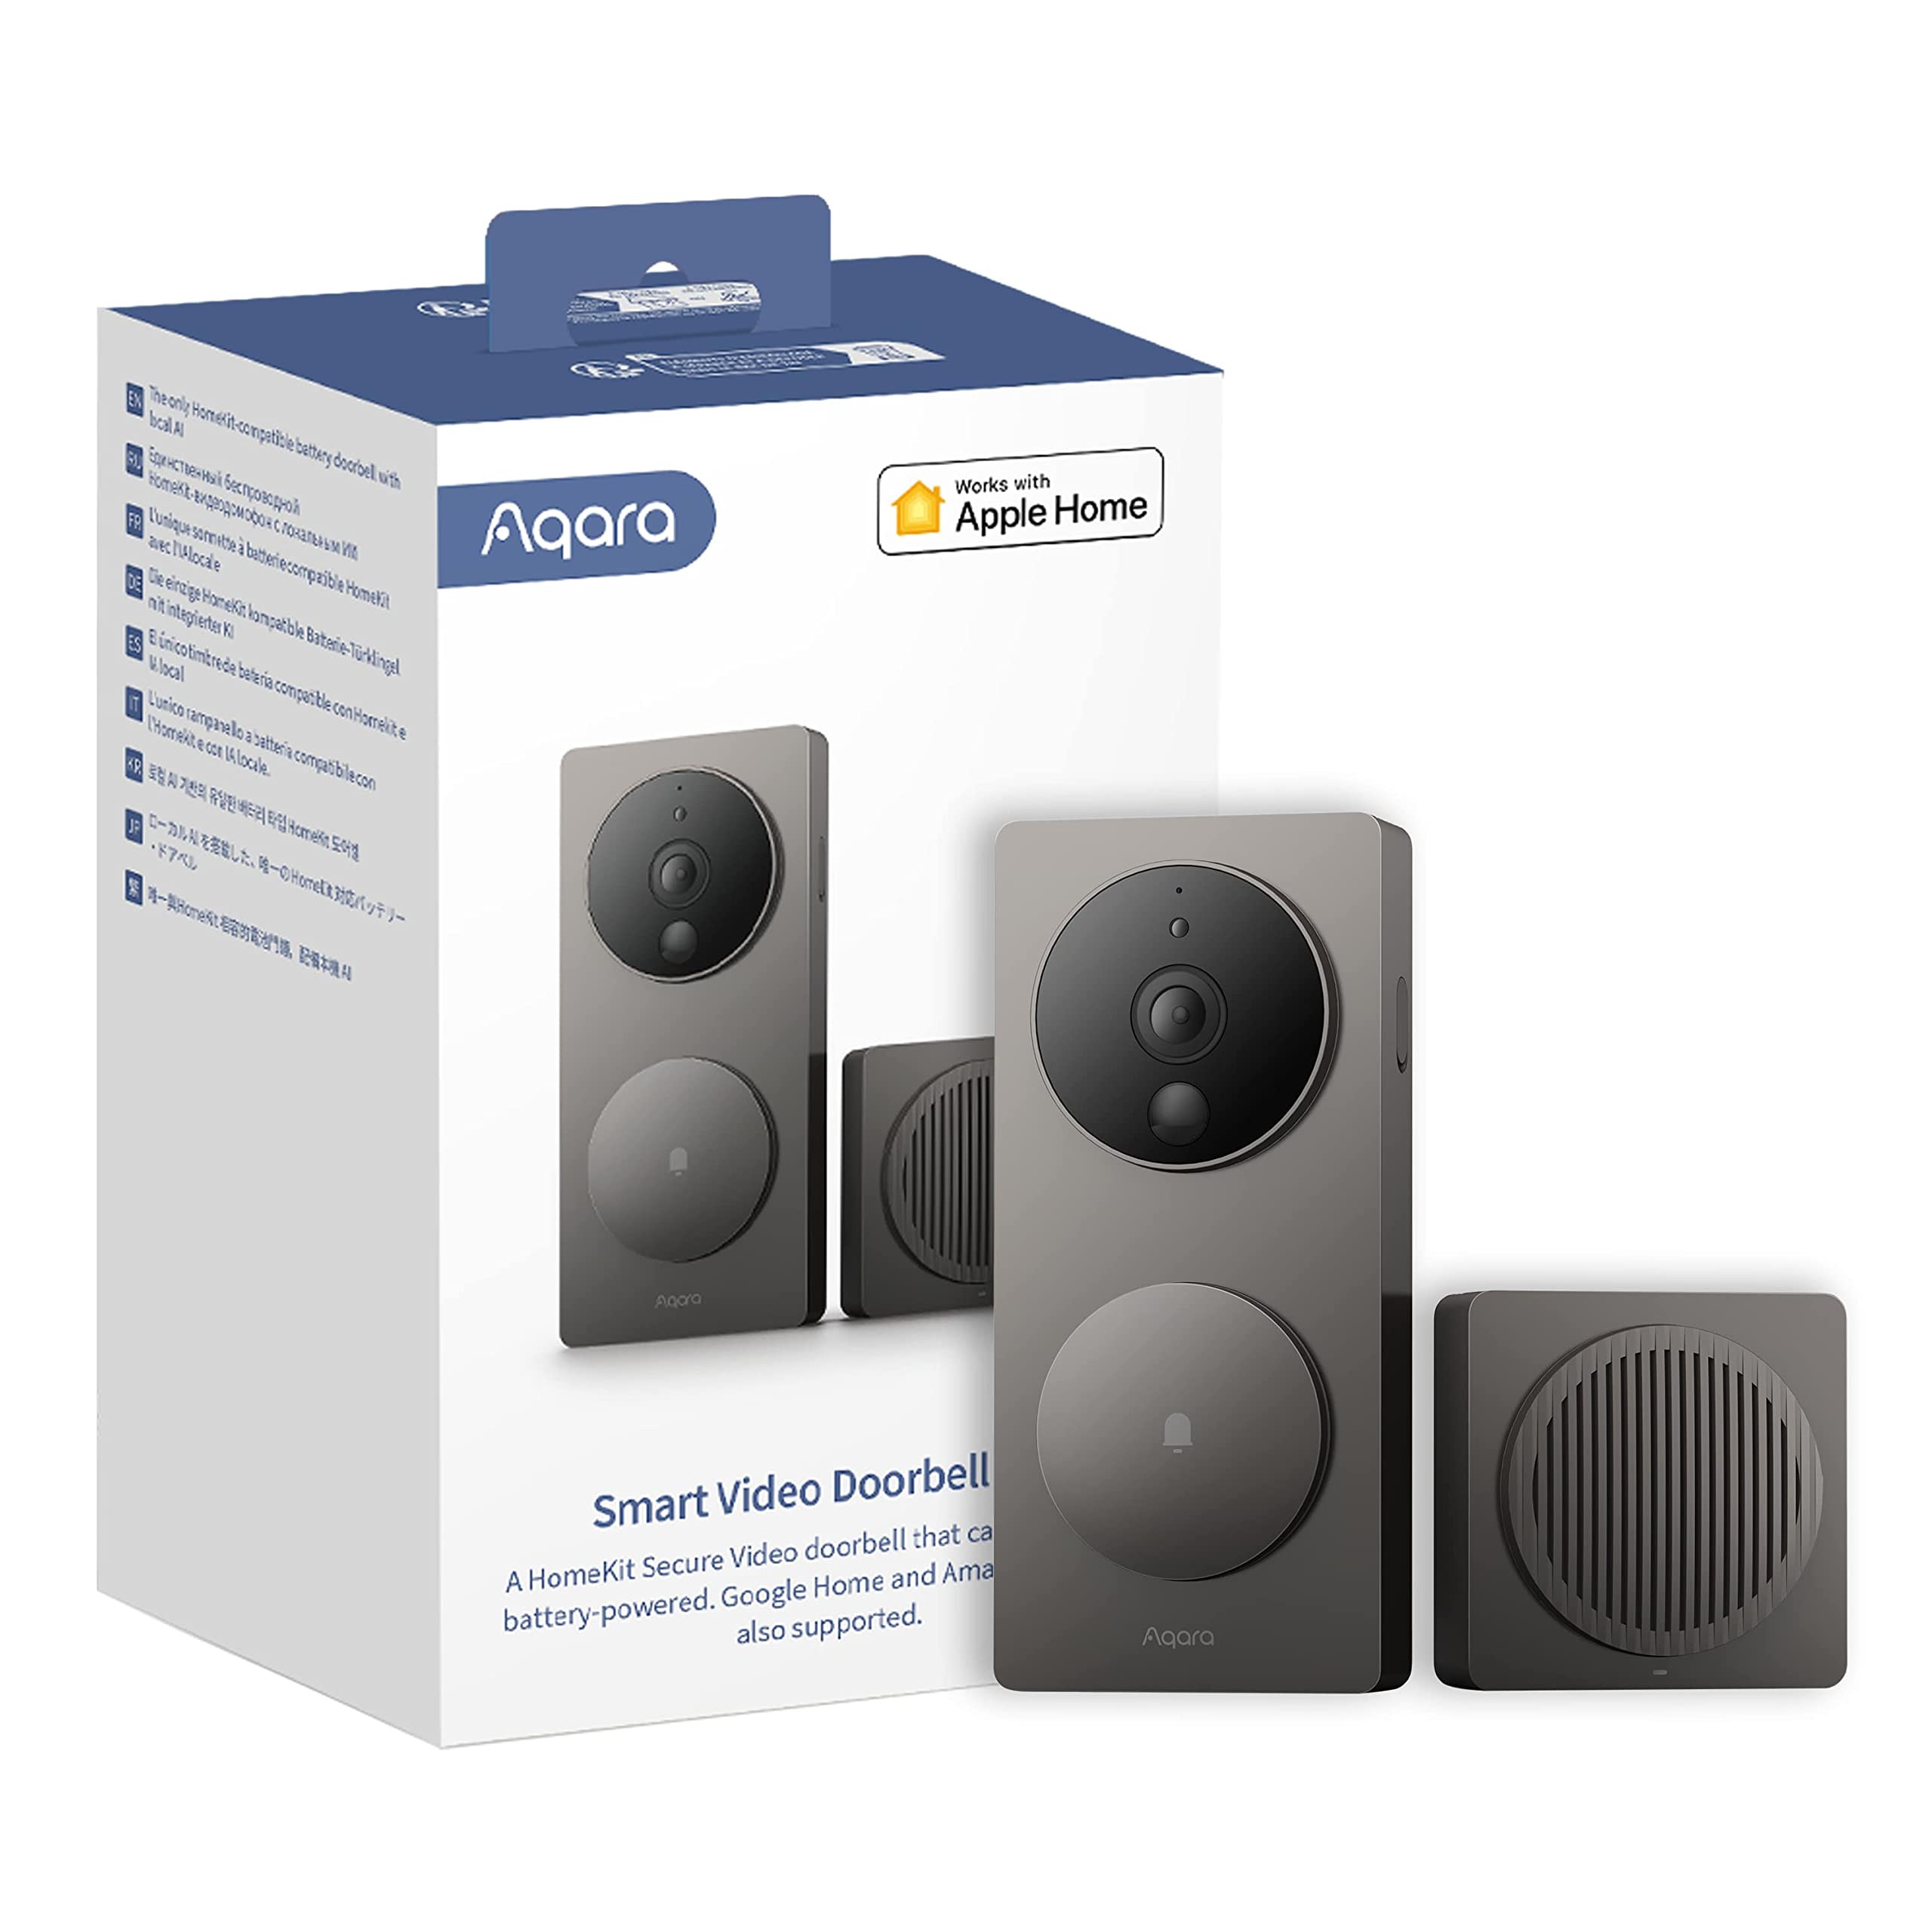 Aqara Video Doorbell G4 (Chime Included), 1080p FHD HomeKit Secure Video Doorbell Camera, Local Face Recognition and Automations, Wireless or Wired, Supports Apple Home, Alexa, Google, IFTTT, Gray